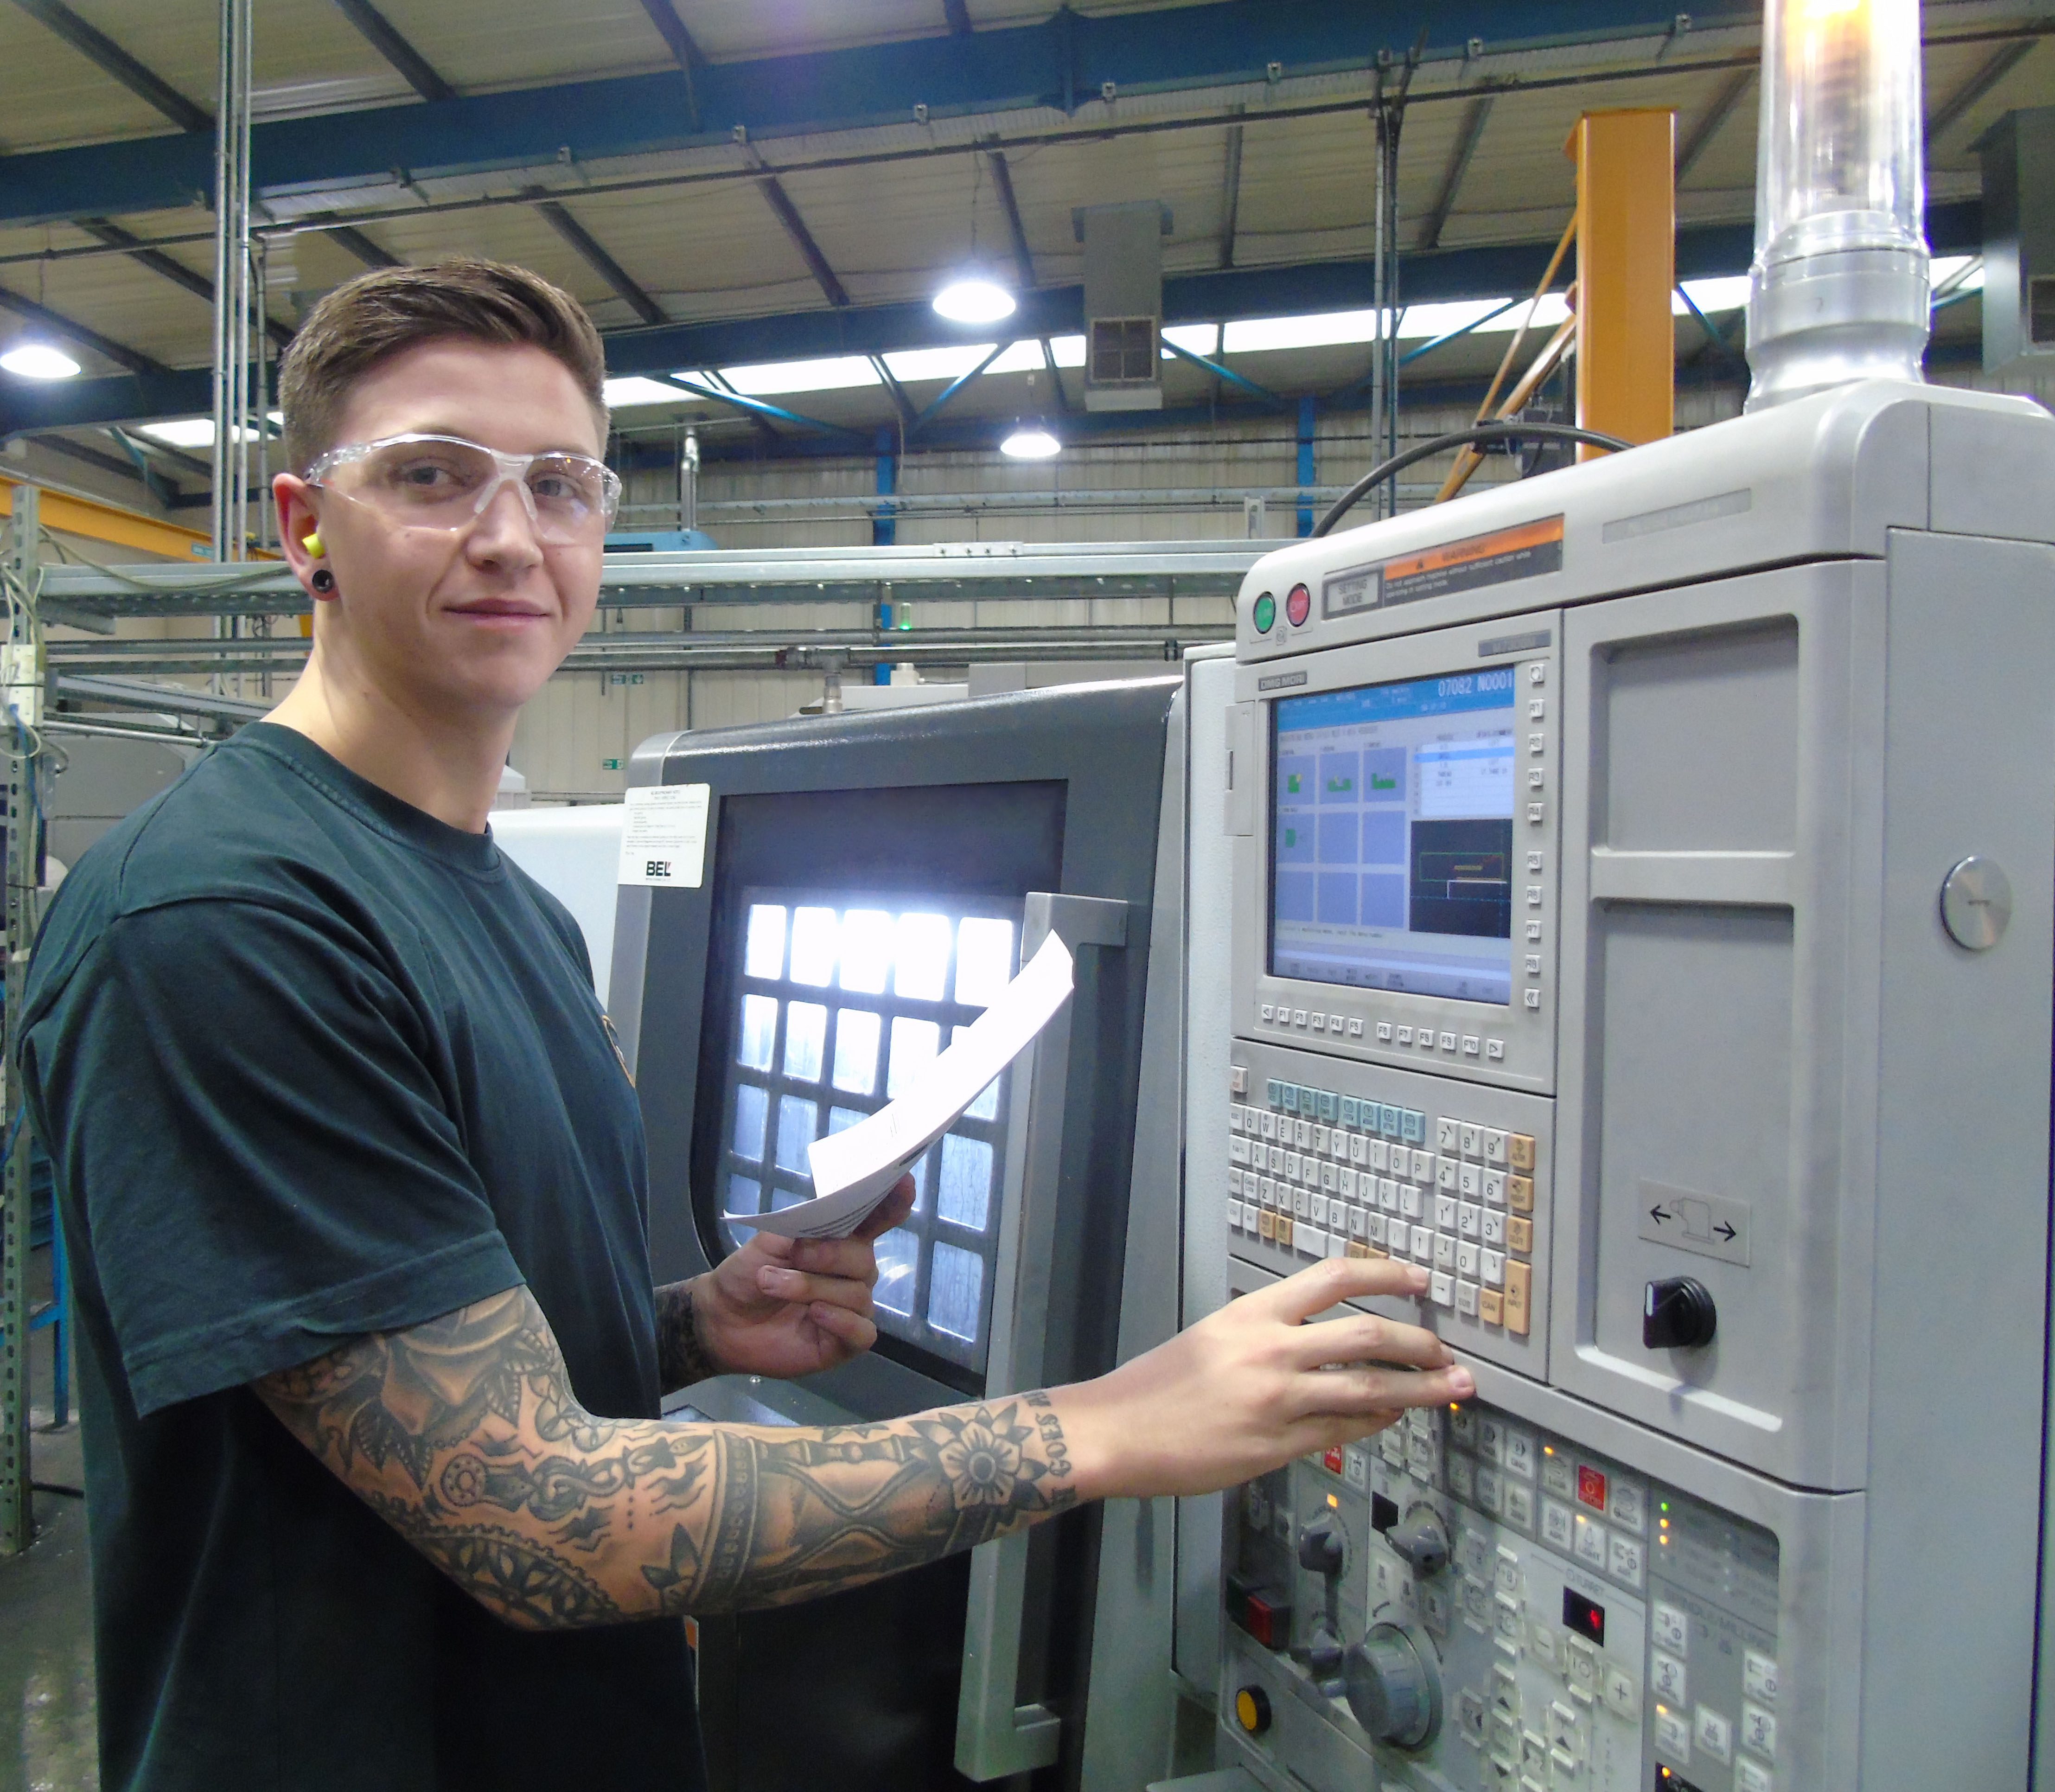 Elliot describes his engineering career so far as a CNC Machinist